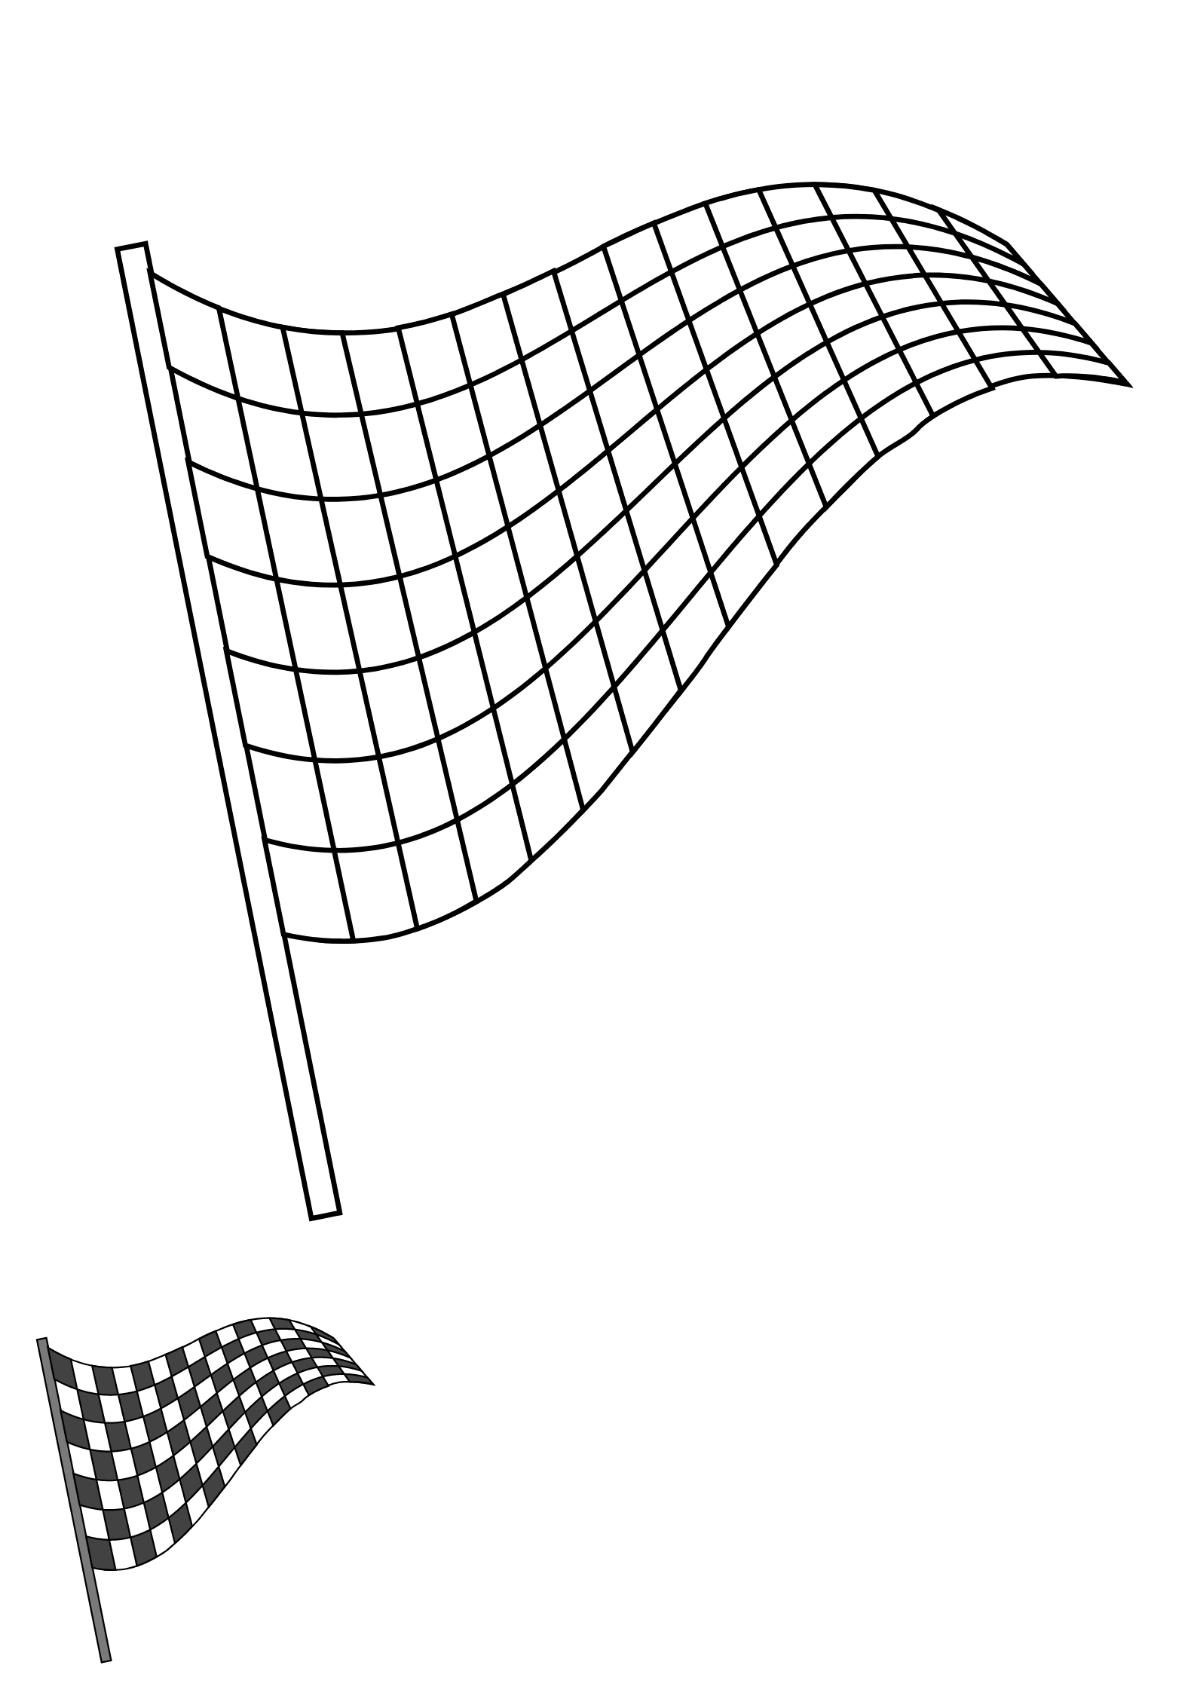 Single Checkered Flag coloring page Template